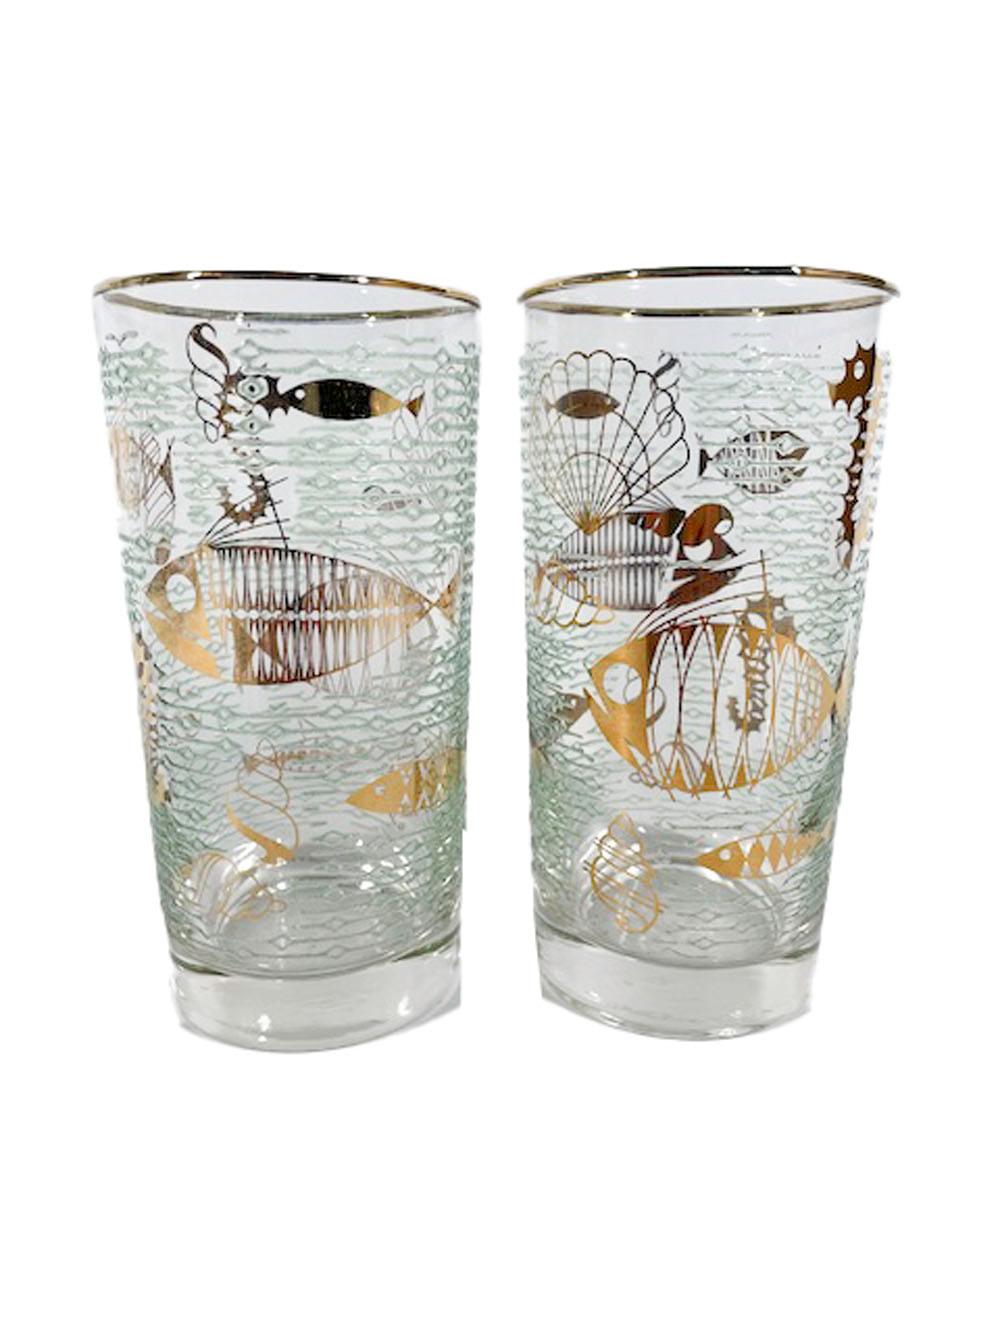 20th Century Eight Libbey Atomic Period Marine Life Highball Glasses in Gold-Tone Caddy